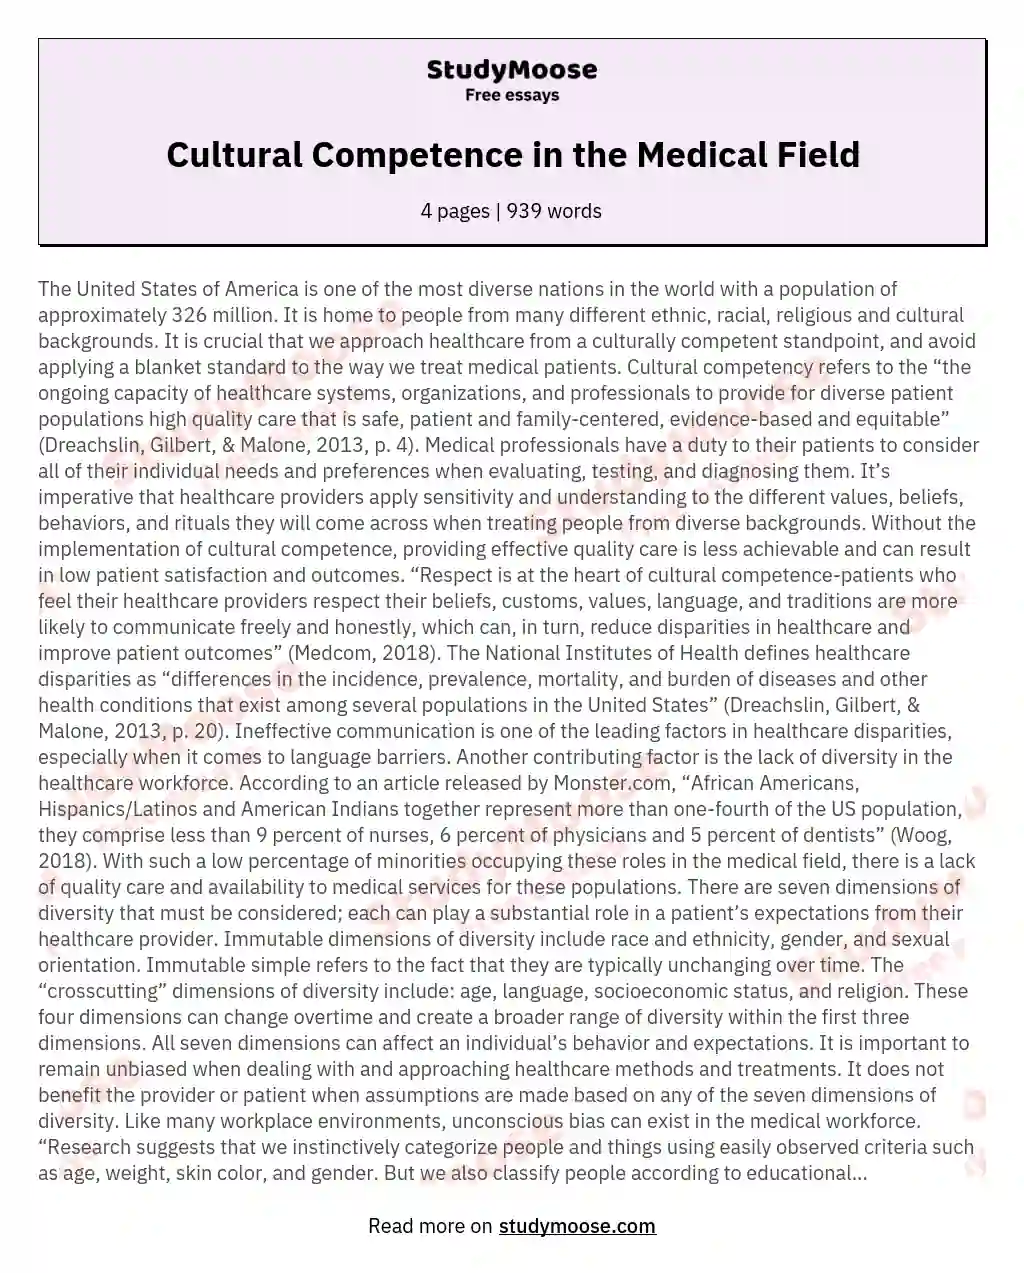 Cultural Competence in the Medical Field essay